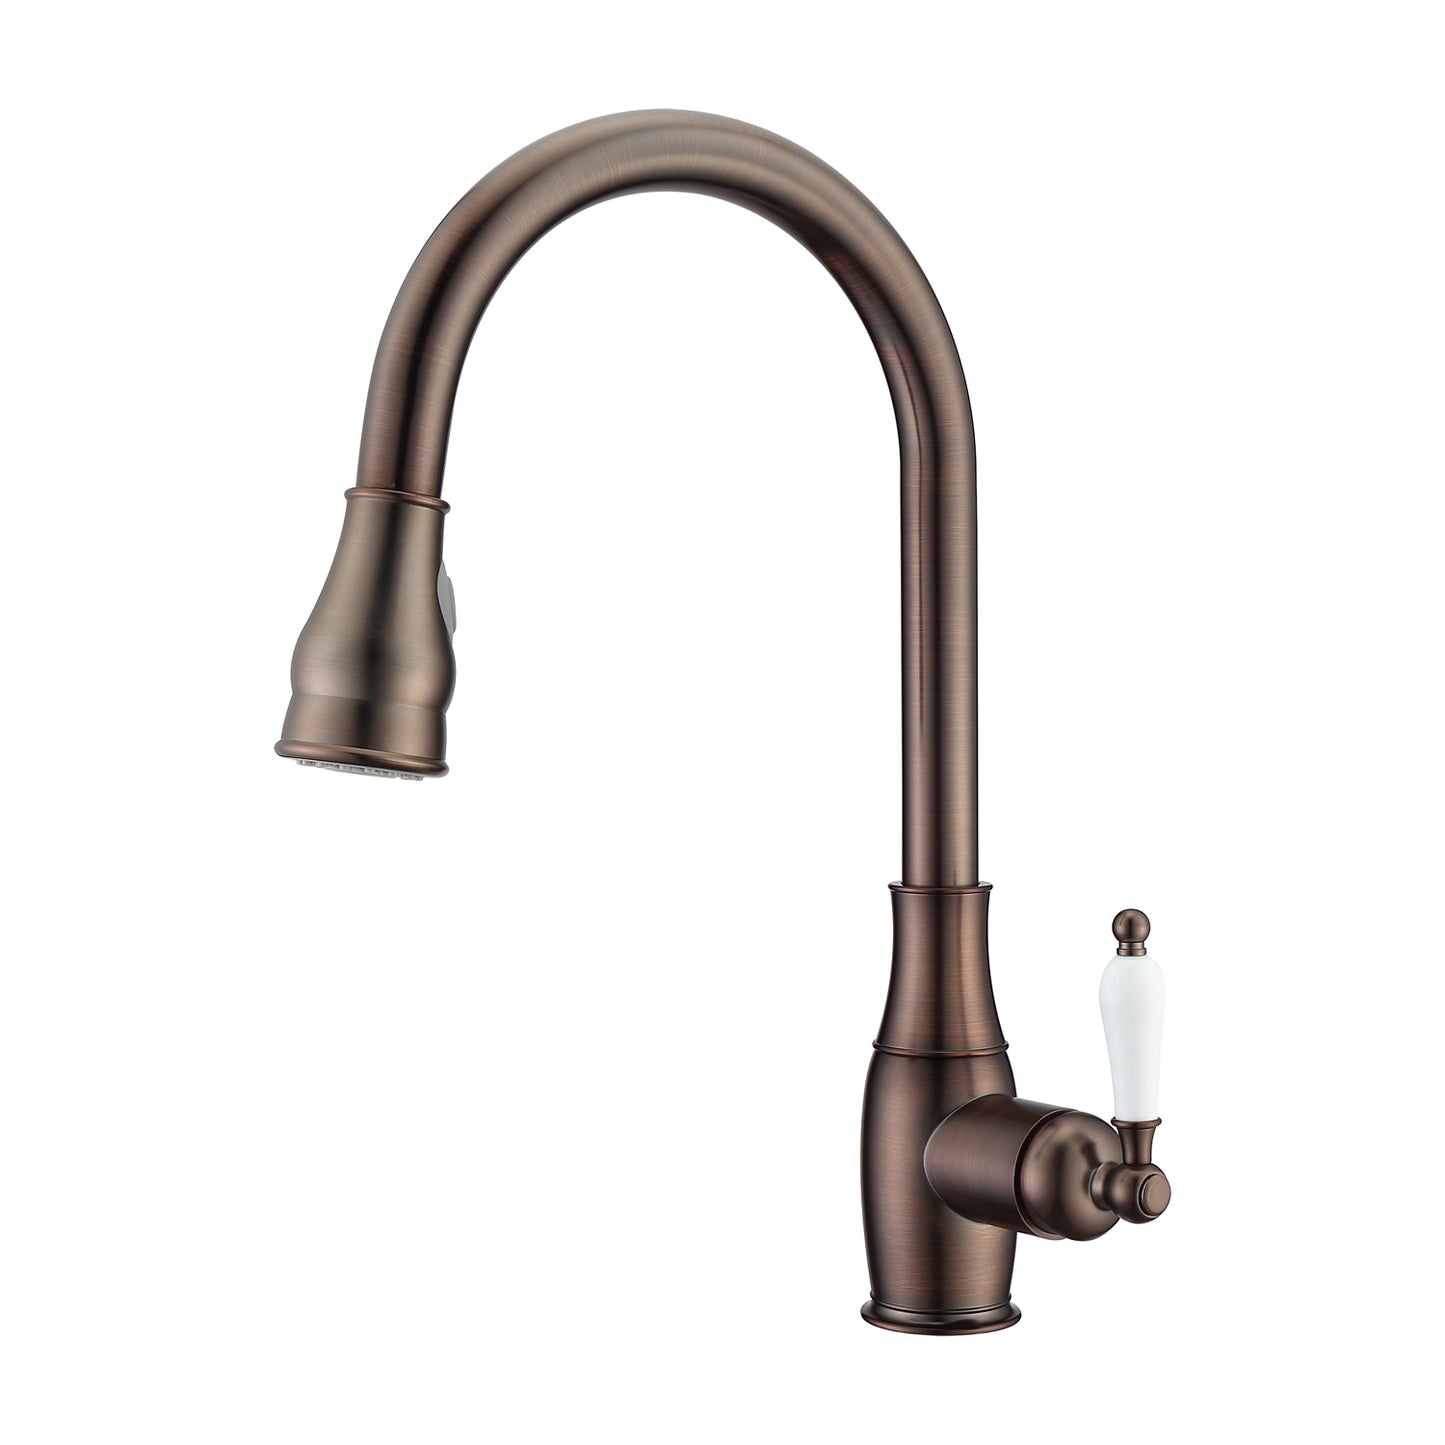 Caryl Kitchen Faucet, Pull-Out Sprayer, Single Porcelain Lever Handle, Oil Rubbed Bronze